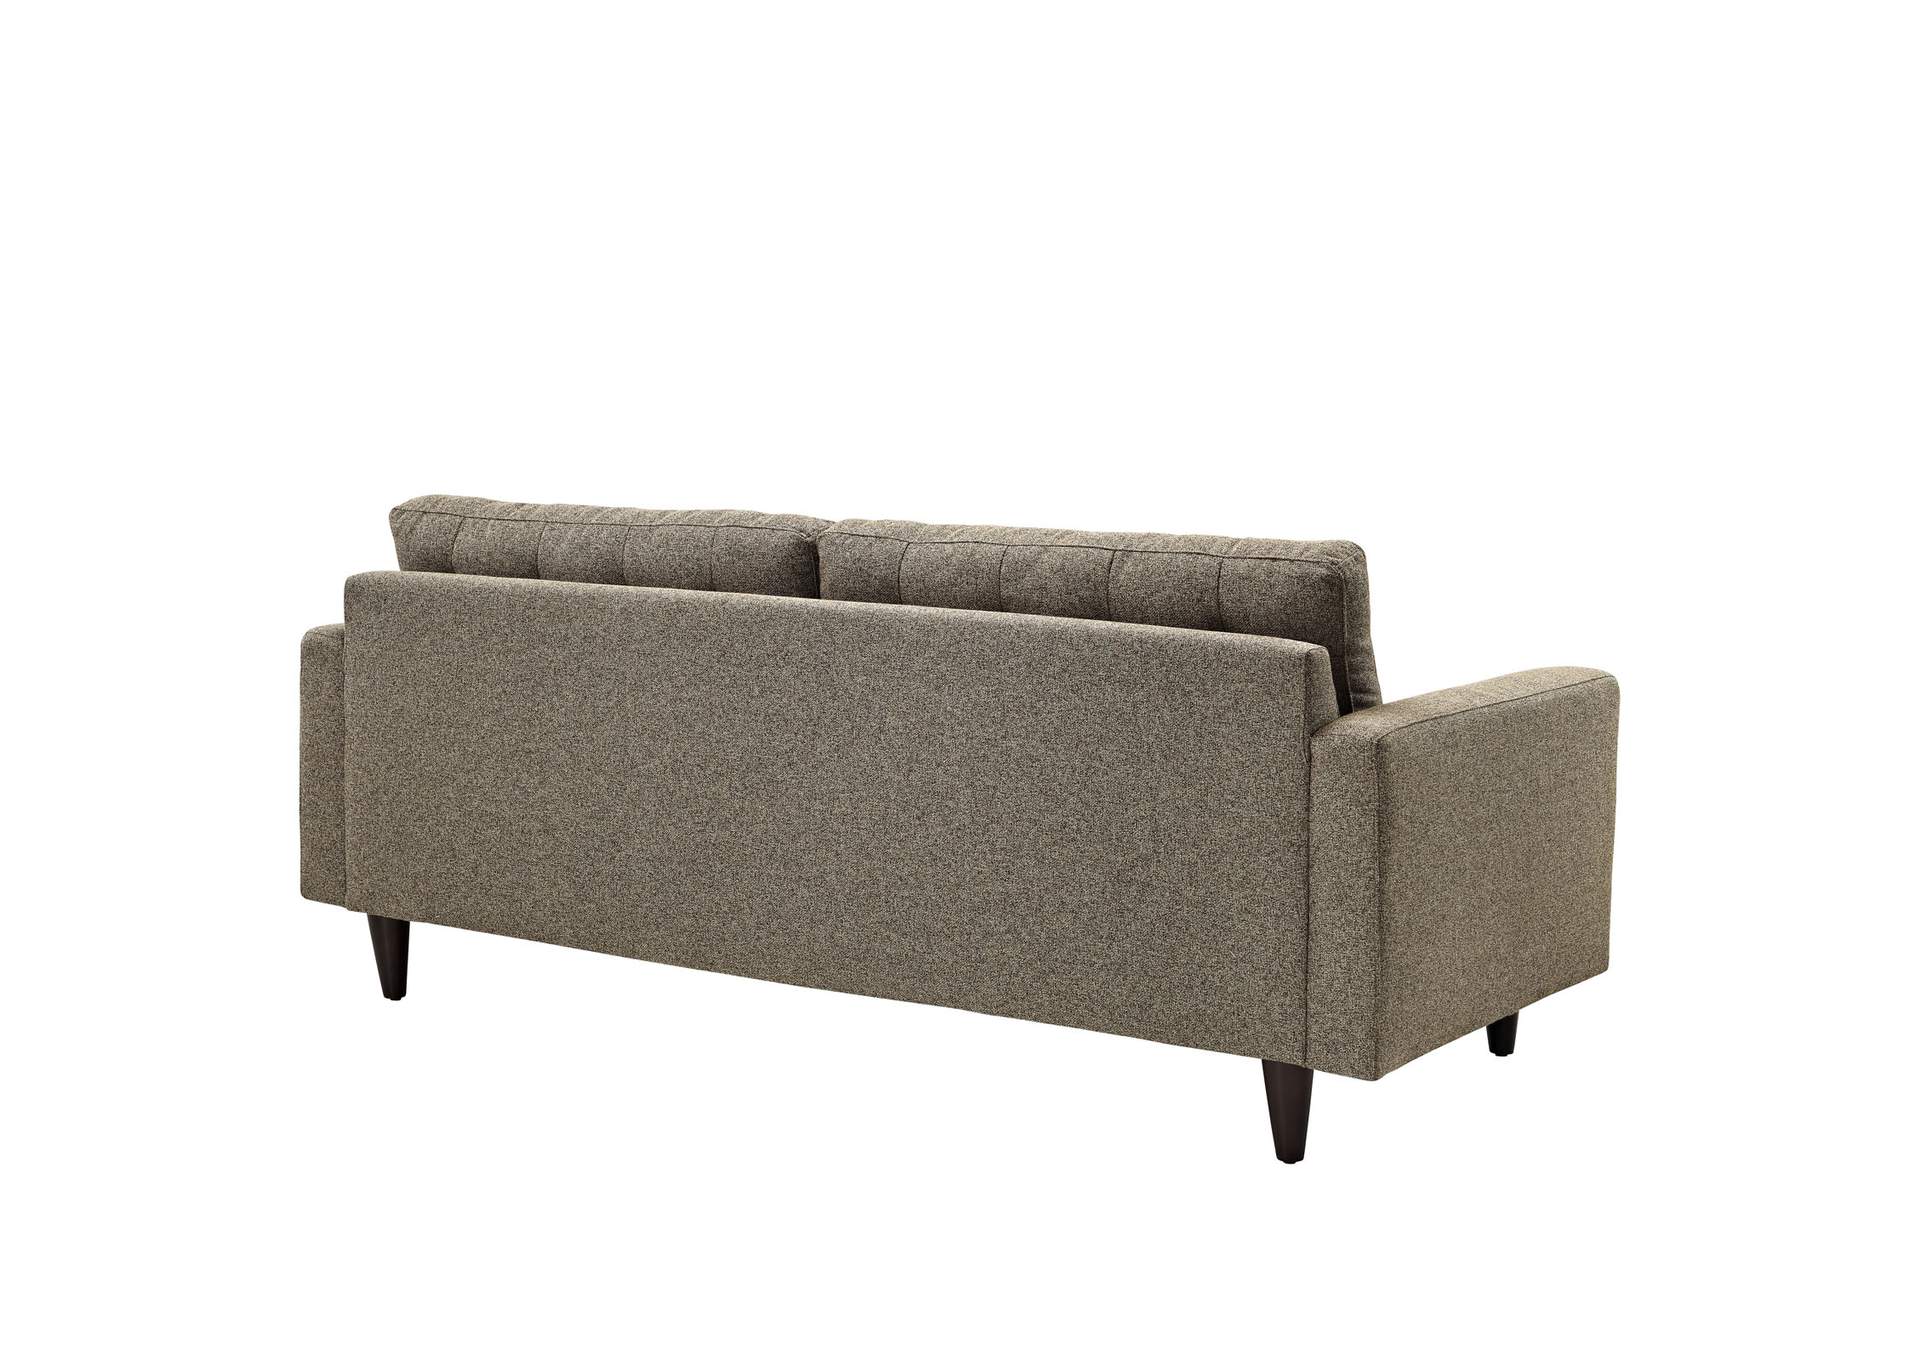 Oatmeal Empress Armchair and Sofa [Set of 2],Modway